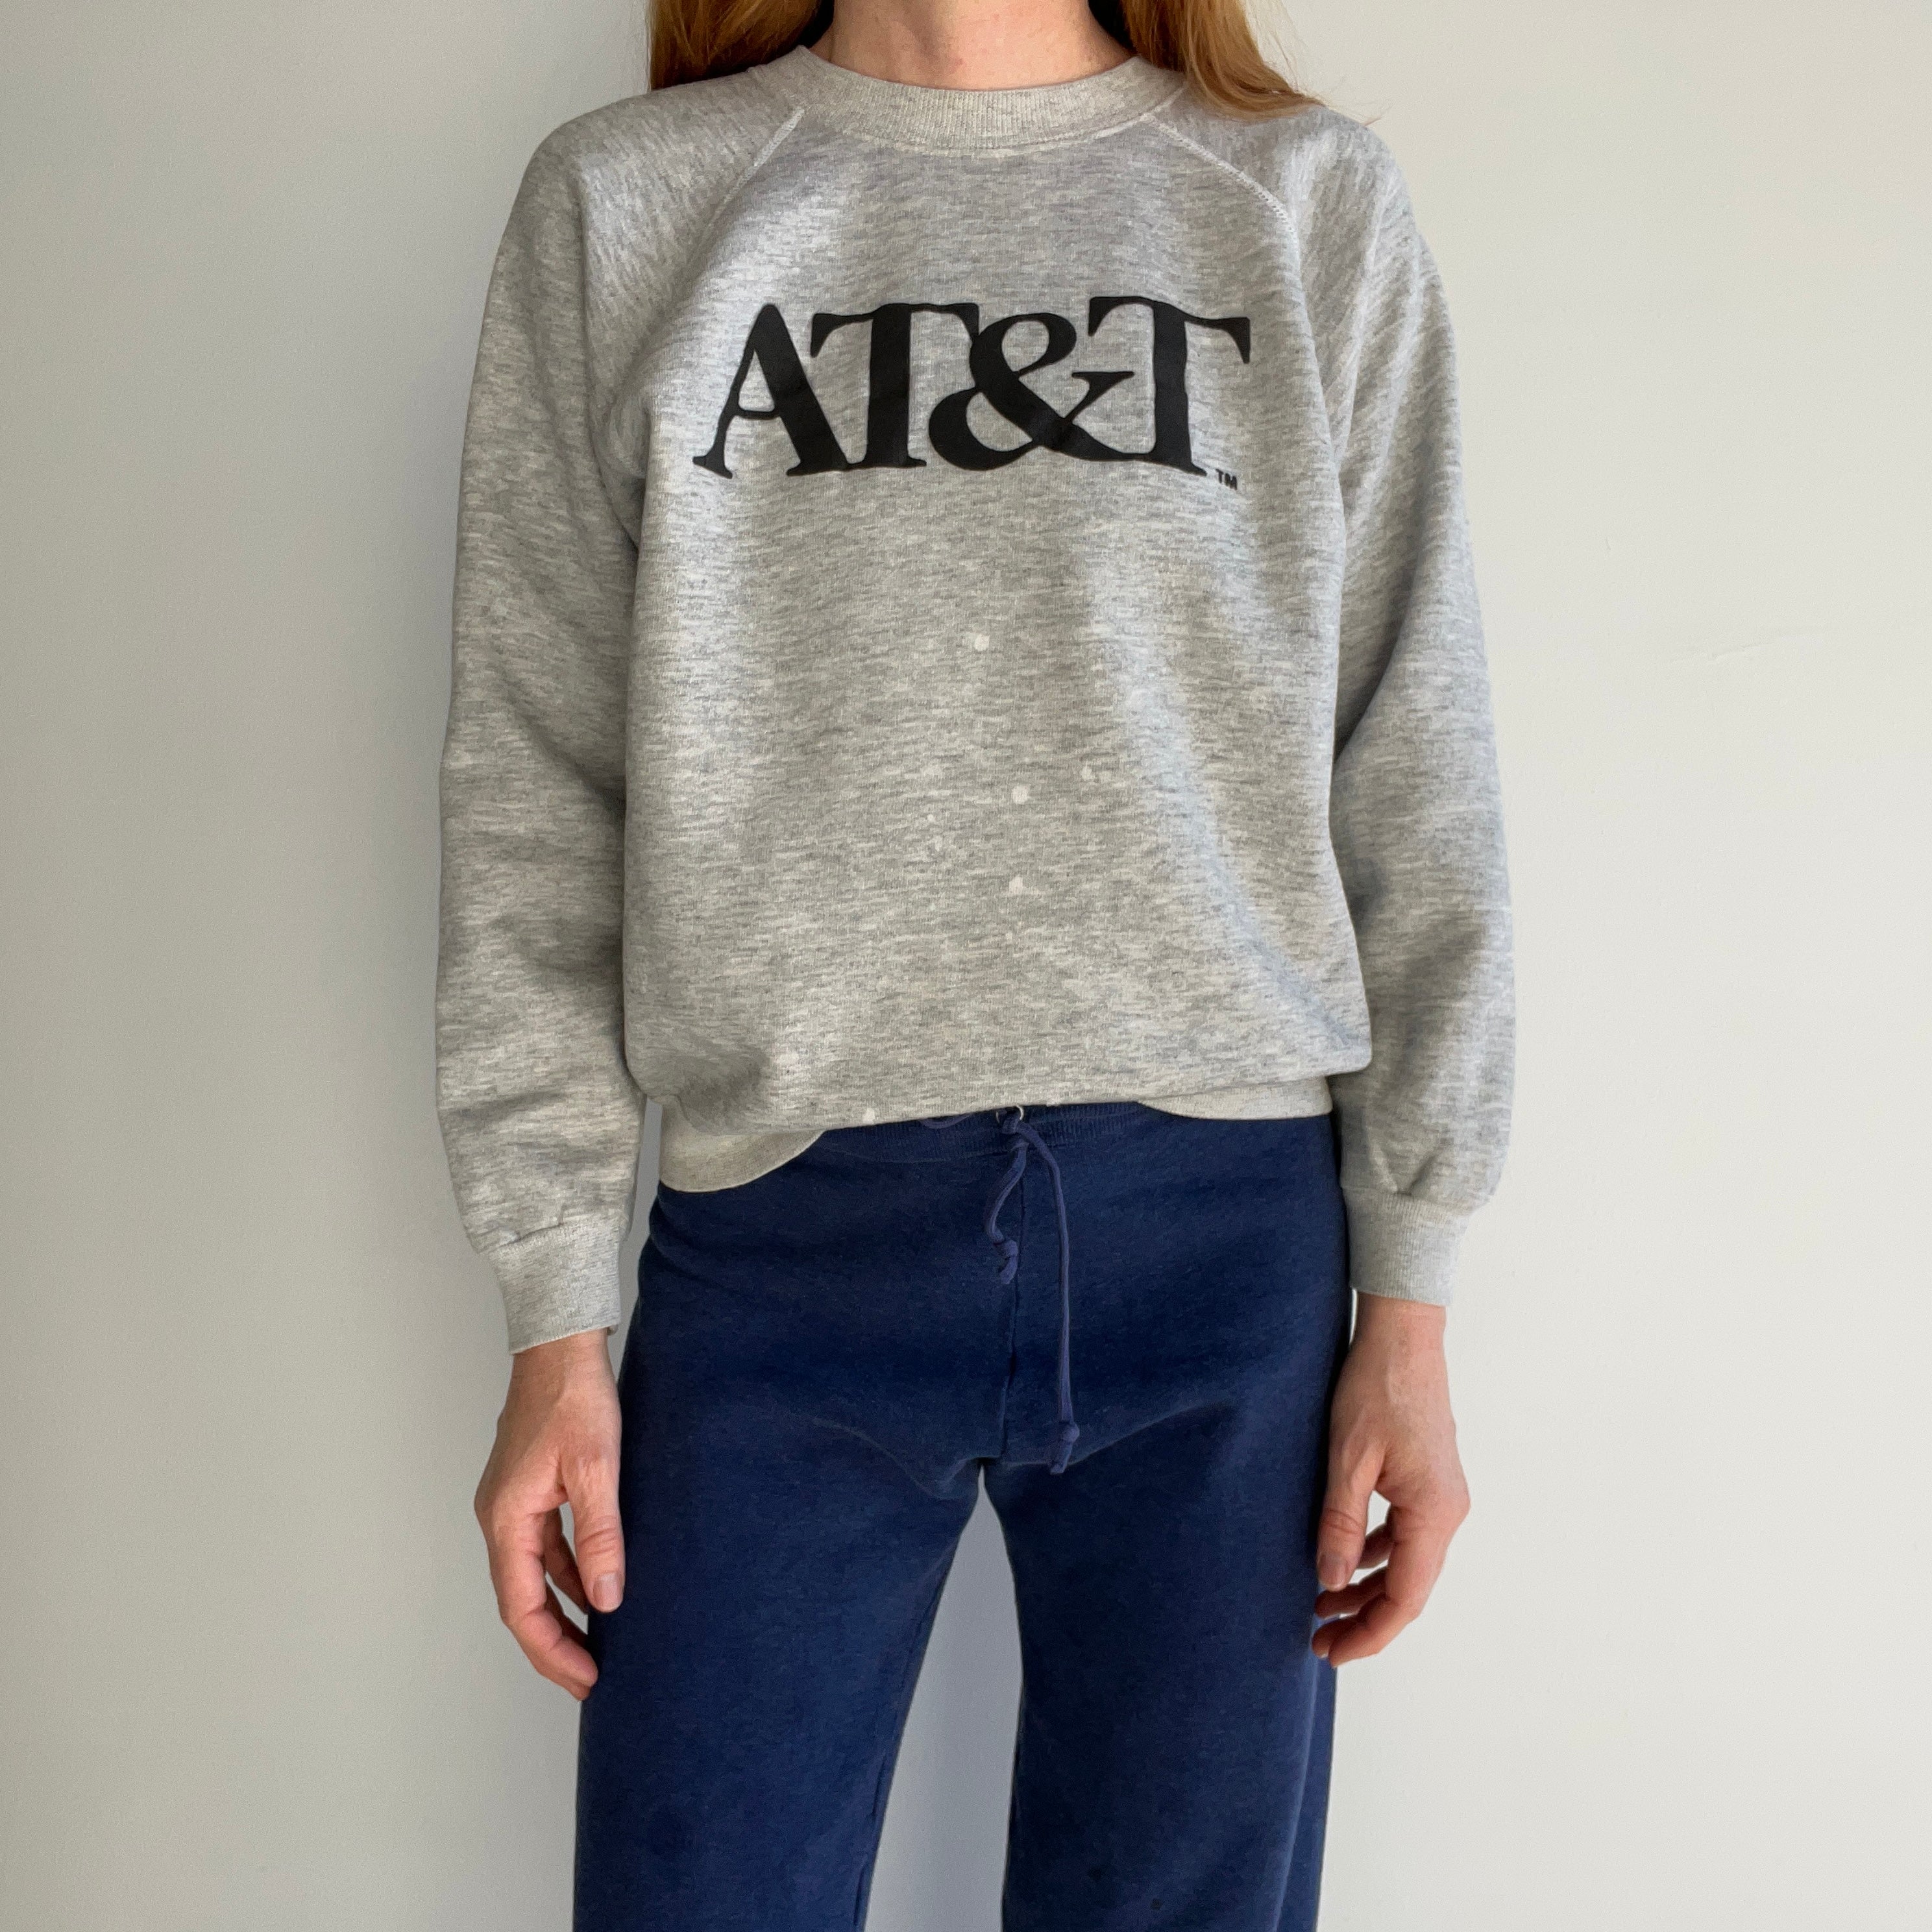 1980s AT&T Sweatshirt with Bleach Staining